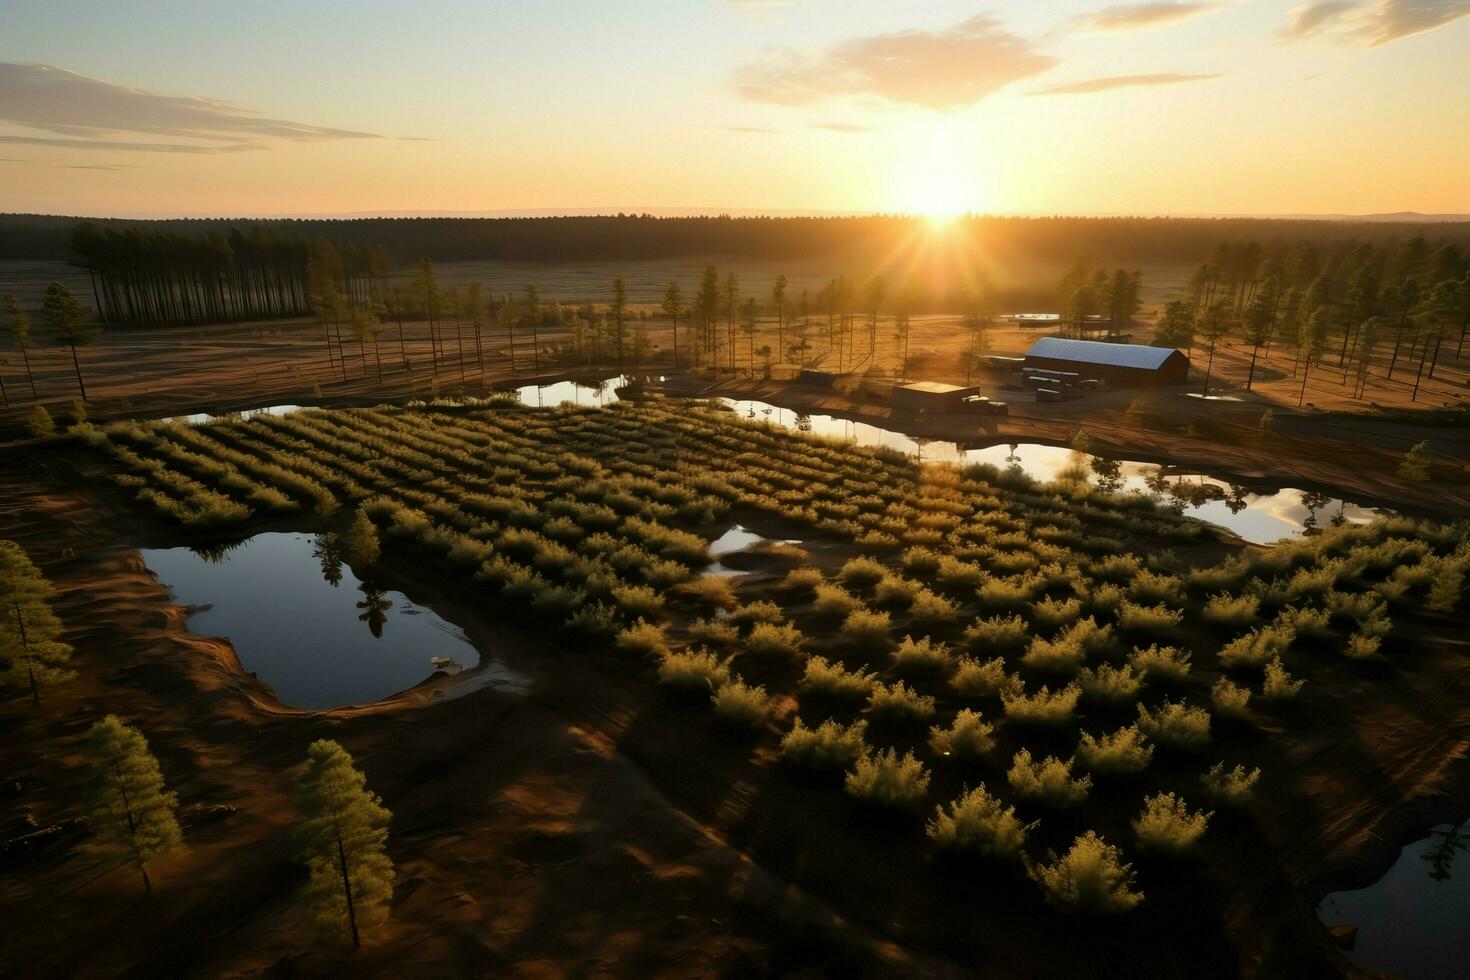 Beautiful view of a tea field plantation, vineyard farm or strawberry garden in the green hills at sunrise concept by AI Generated photo